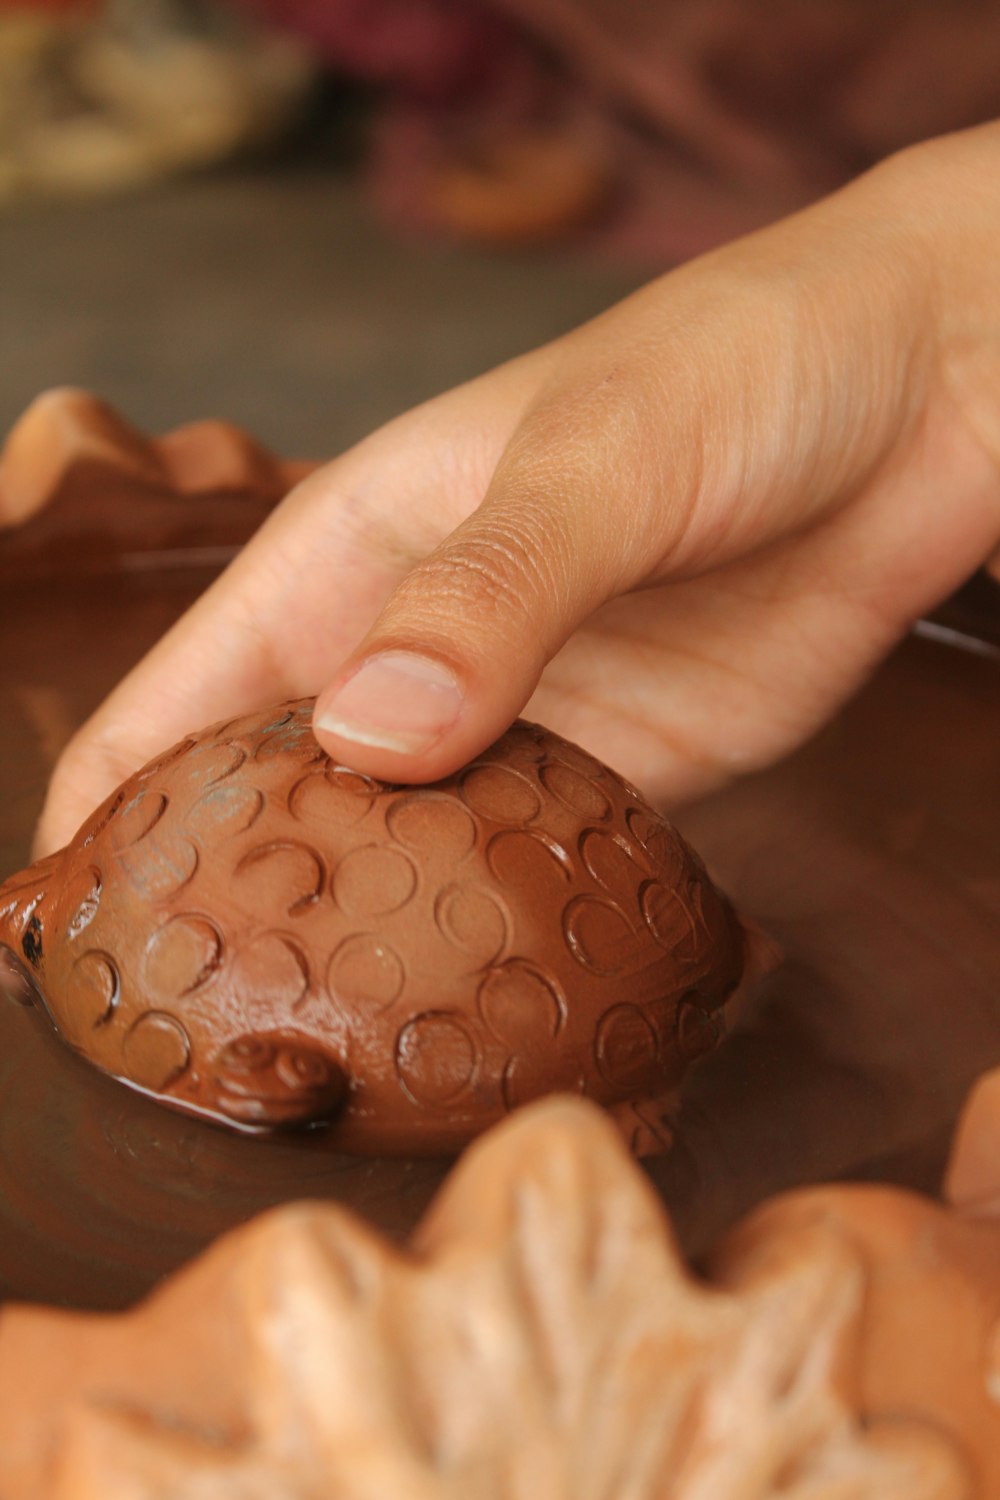 a hand touching a chocolate object on a table